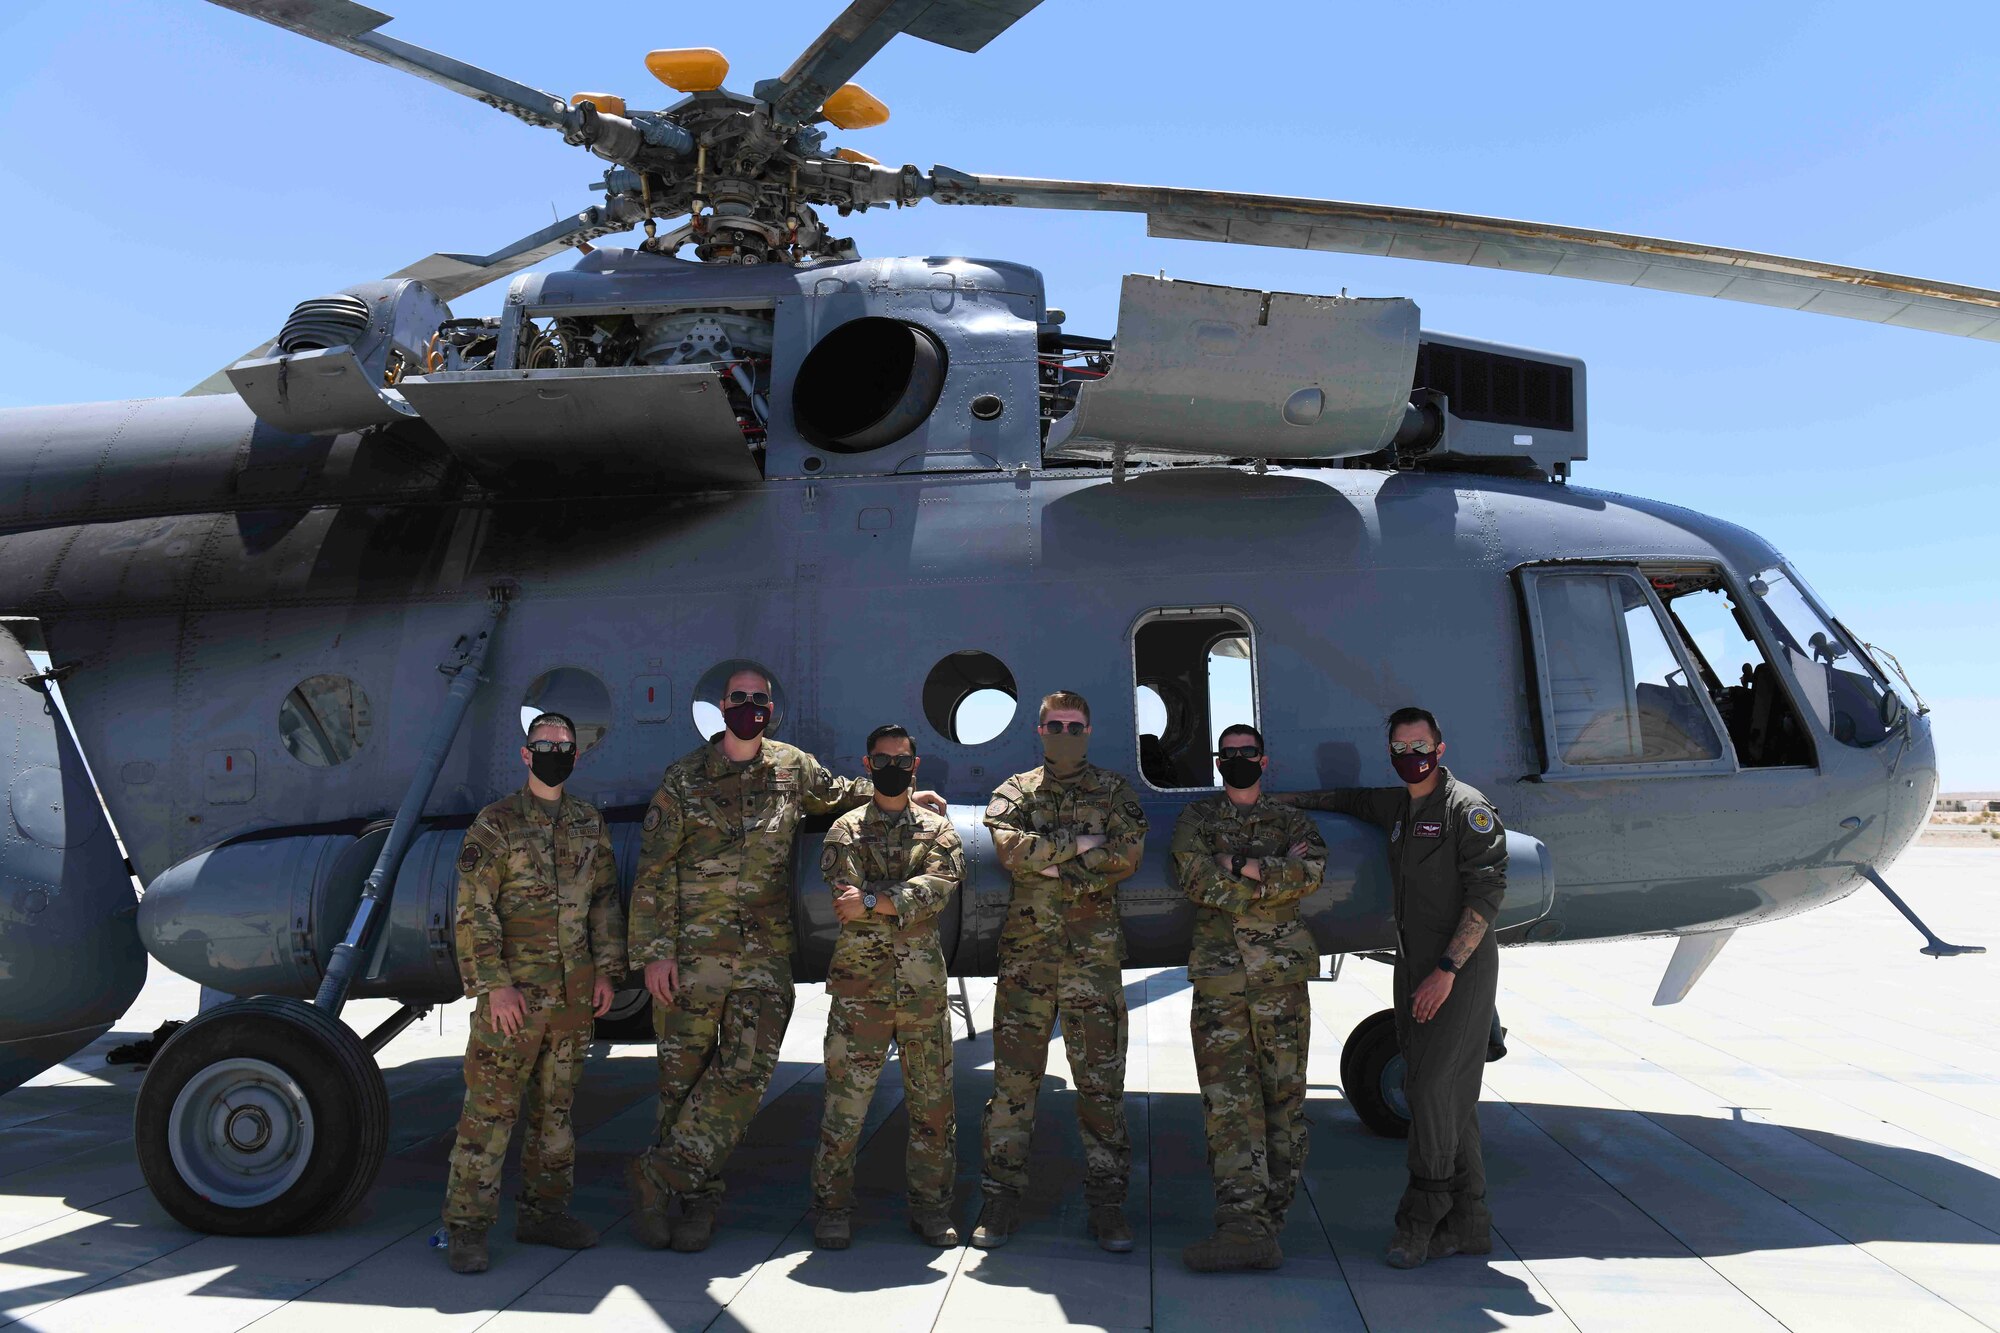 Team Fairchild Airmen from the 384th and 93rd Air Refueling Squadrons pose in front of a Mil Mi-17 helicopter after flying over the Marine Corps Air Ground Combat Center, May 6, 2021. The observation allowed Team Fairchild the opportunity to create a joint partnership between Airmen and Marines for future exercises. (U.S. Air Force photo by Airman 1st Class Kiaundra Miller)